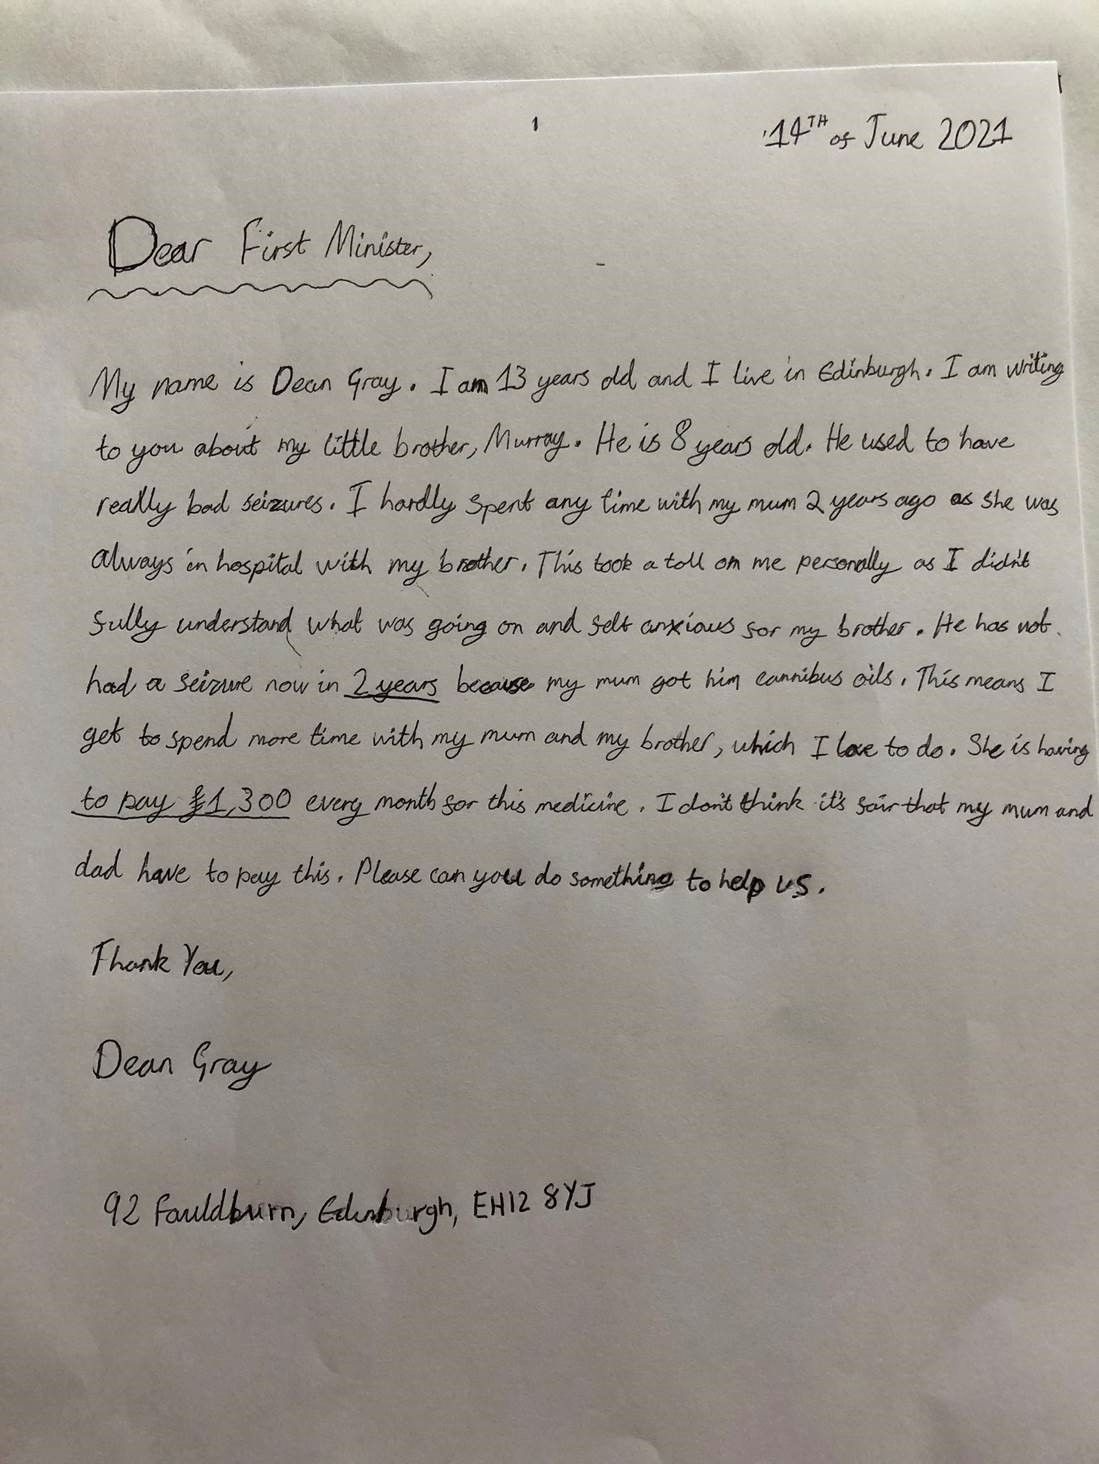 The letter sent by Dean Gray to First Minister Nicola Sturgeon (Dean Gray/End Our Pain Campaign)